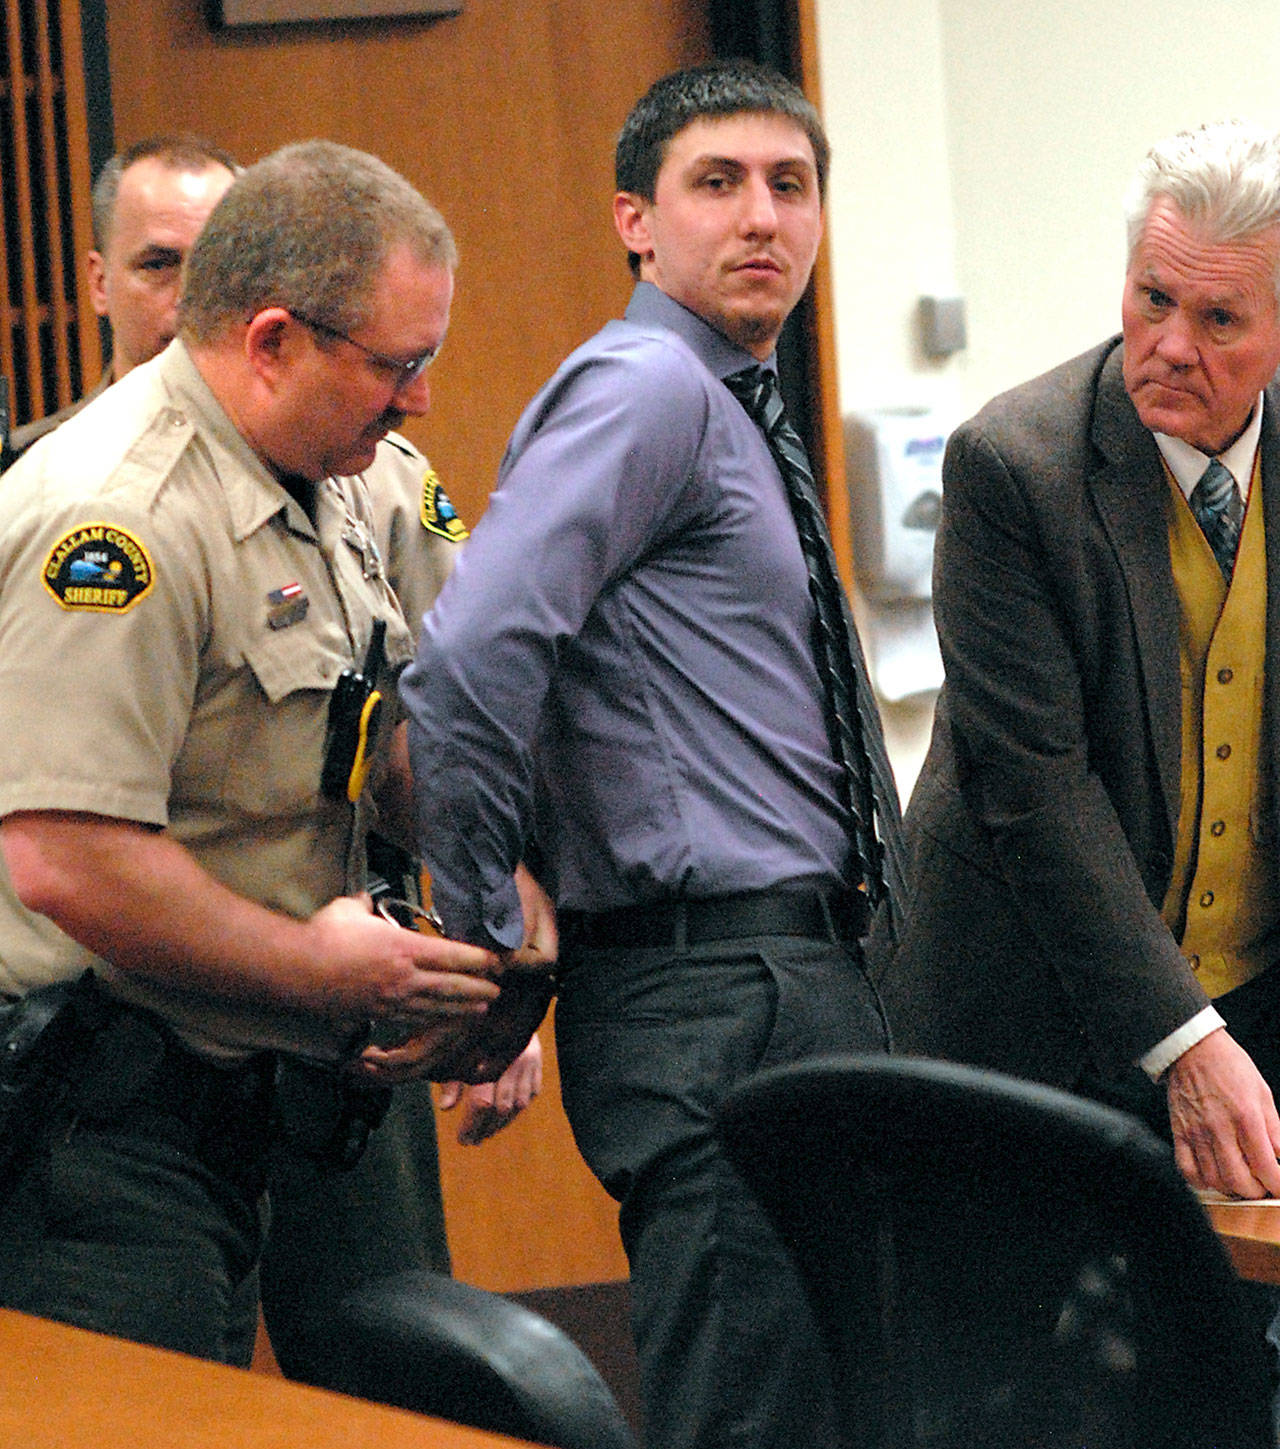 Zachary Alan Fletcher, 23, is handcuffed by Clallam County Corrections Deputy Richard Bray, left, as attorney Lane Wolfley looks on at right after Fletcher was sentenced to 48 months in custody on Wednesday, March 11, 2020, in Clallam County Superior Court on two charges of alcohol-related vehicular assault. (Keith Thorpe/Peninsula Daily News)